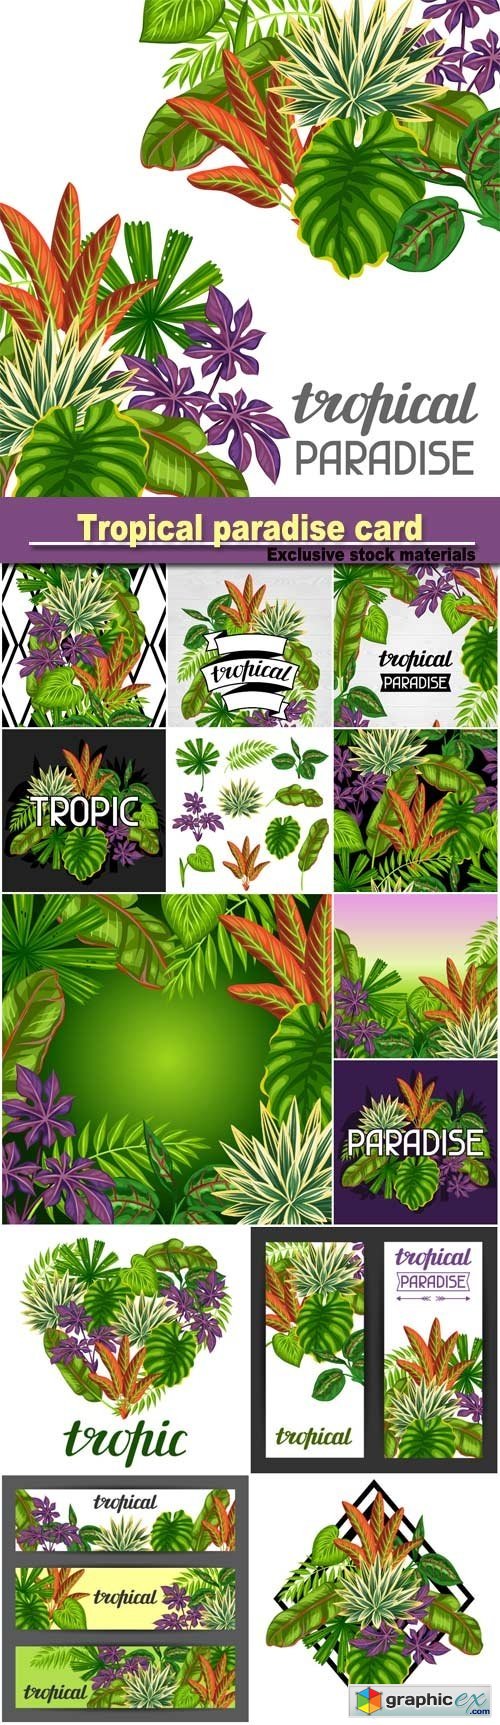 Tropical paradise card with stylized leaves and flowers